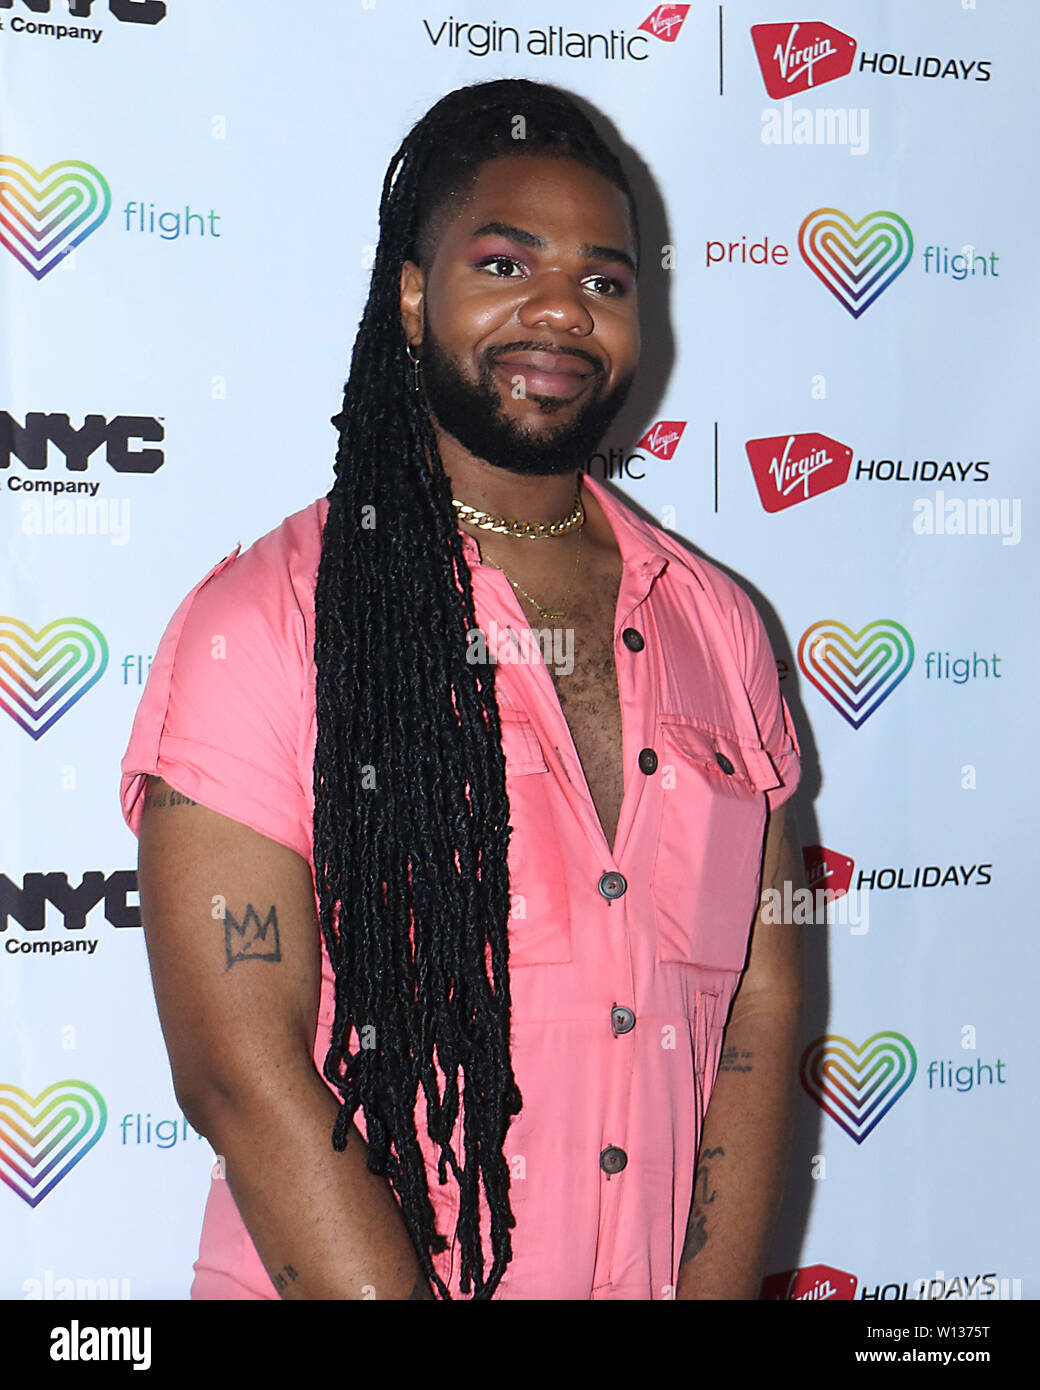 New York, USA . 29th June, 2019. June 29, 2019. MNEK  attend Virgin Atlantic And Virgin Holidays World Pride Celebration at One World Observatory in New York June 29, 2019  Credit:RW/MediaPunch Credit: MediaPunch Inc/Alamy Live News Stock Photo